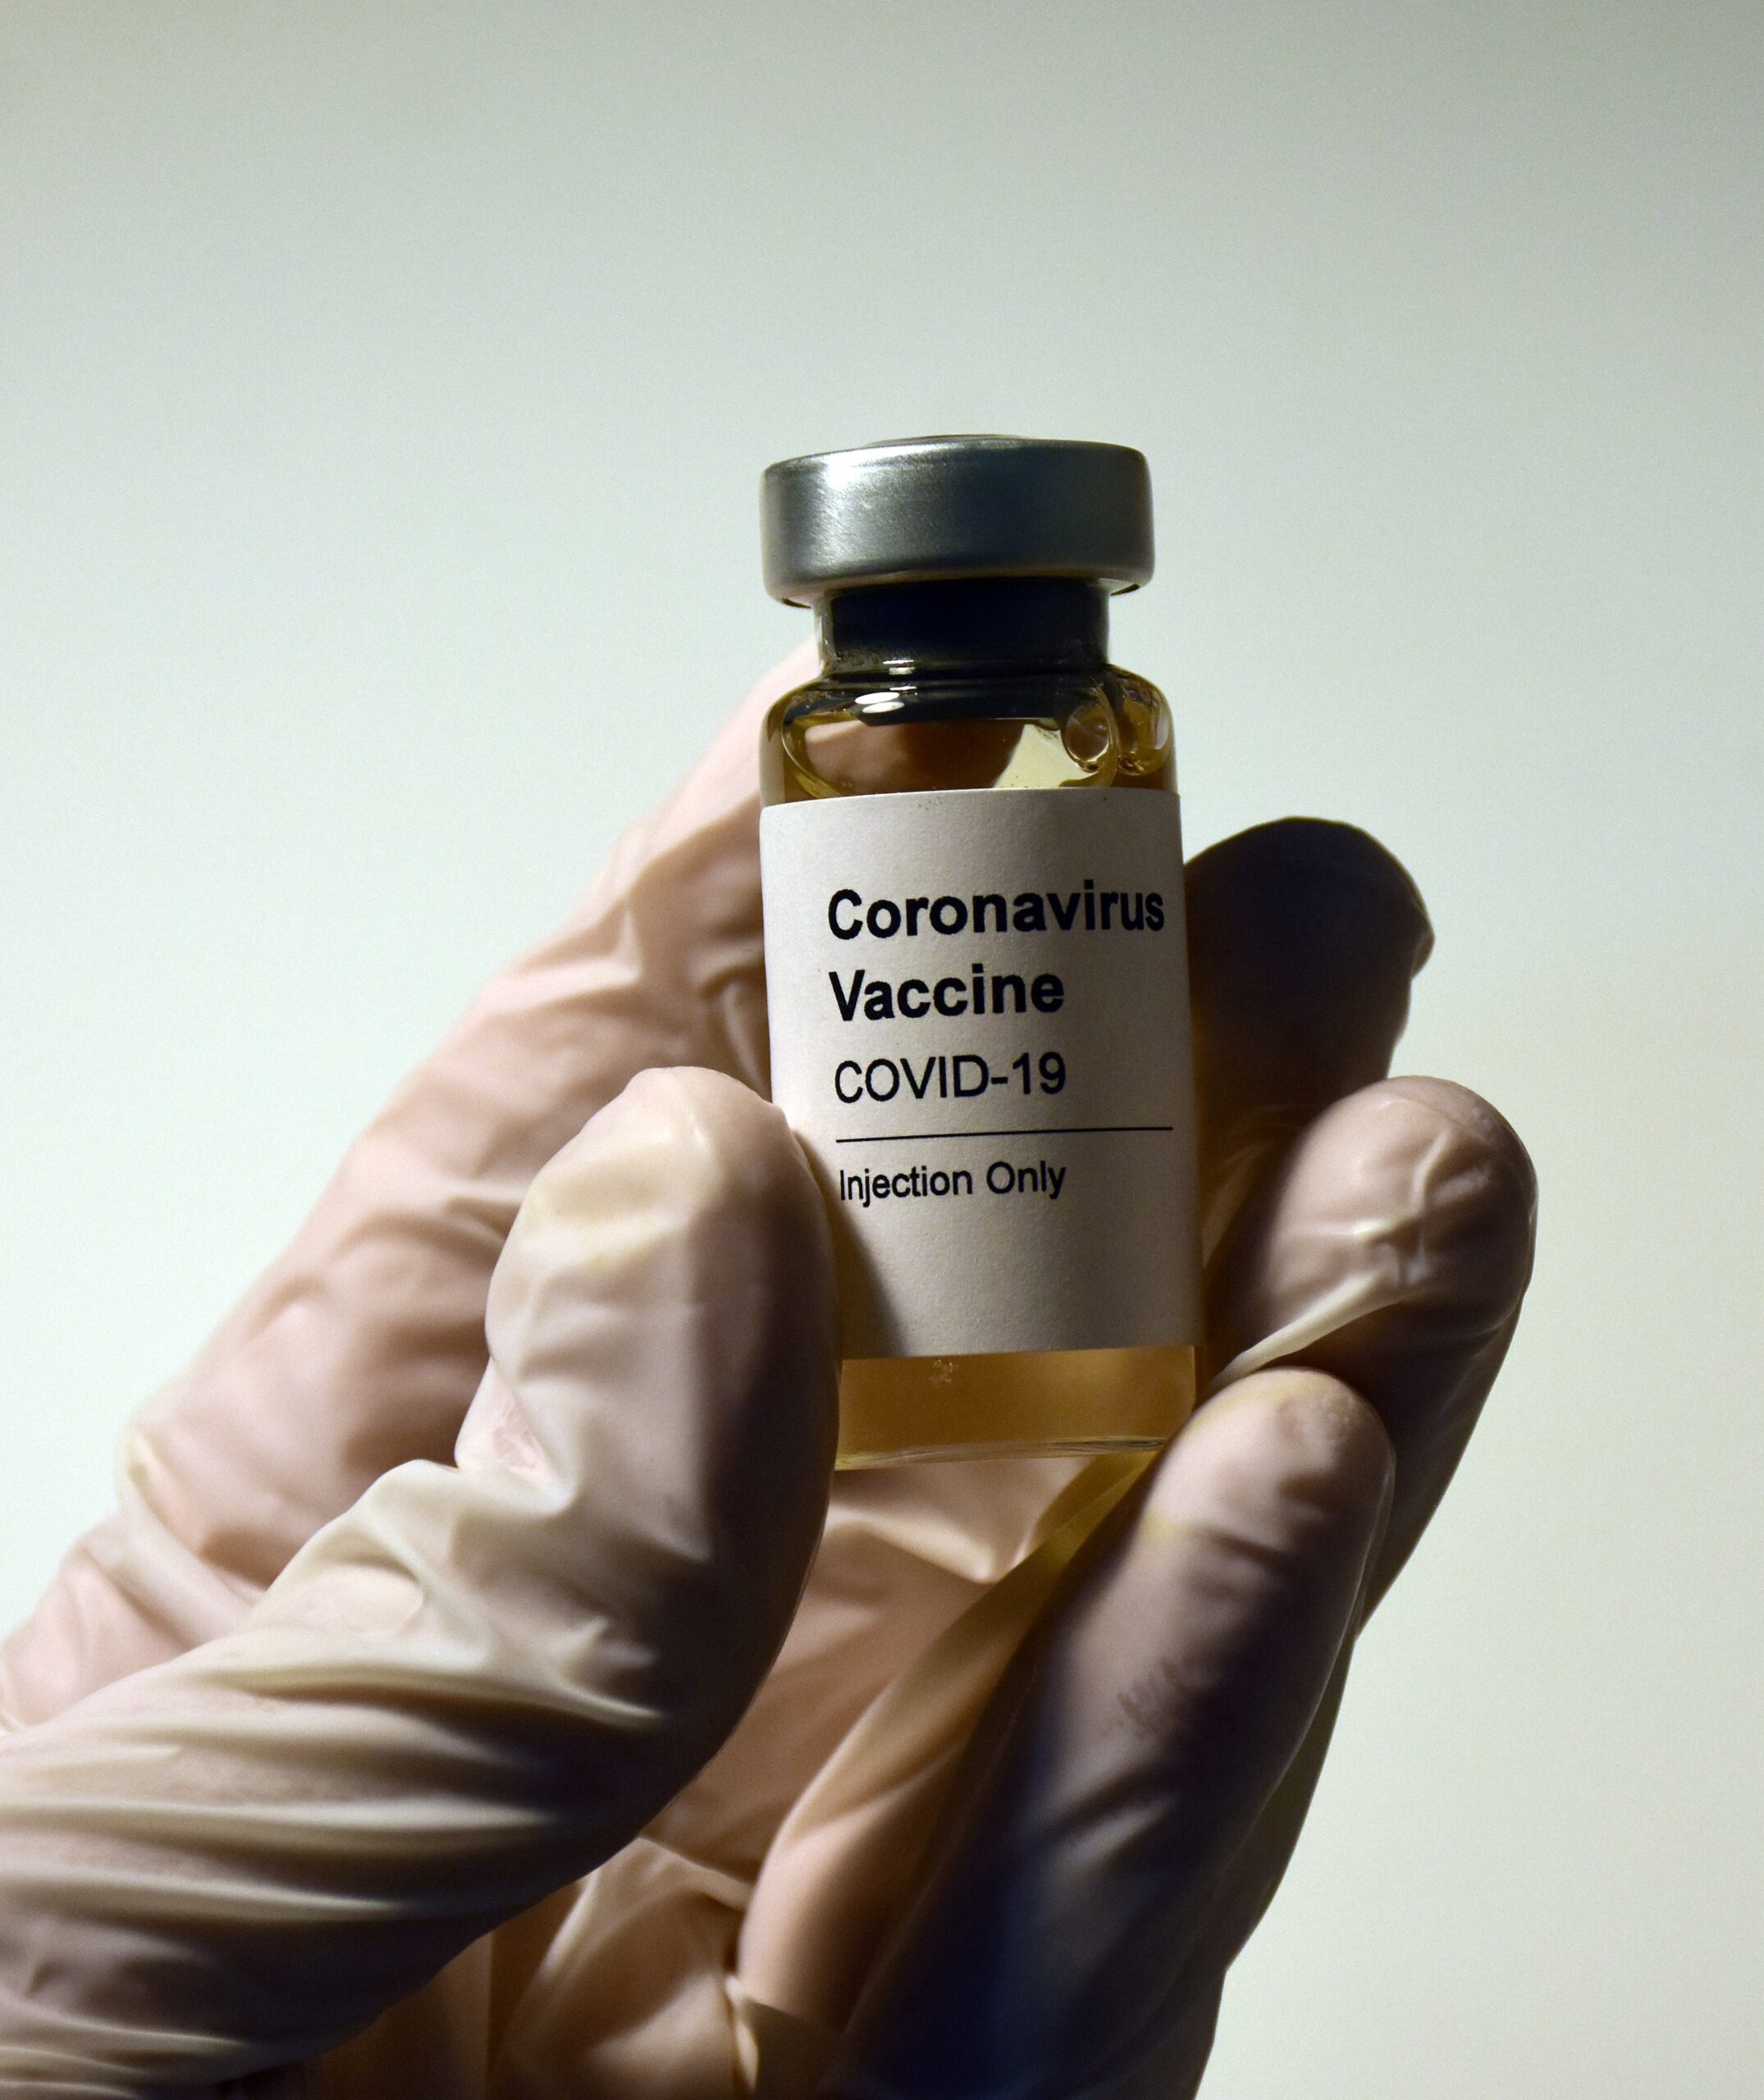 Students debate COVID-19 vaccine’s efficacy, long-term impacts